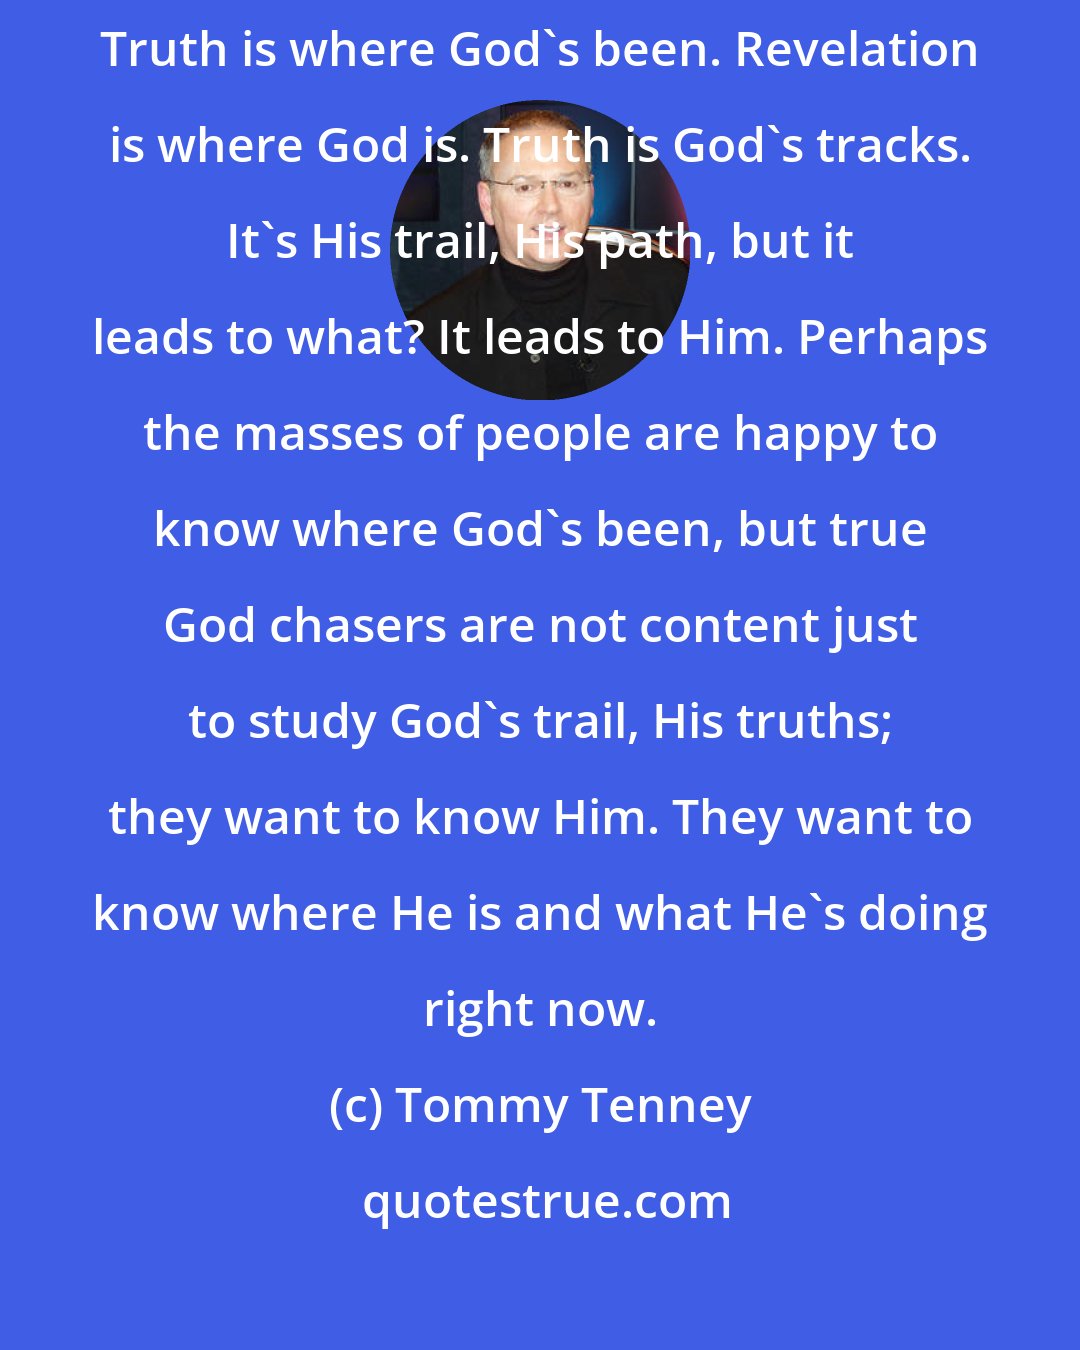 Tommy Tenney: The difference between the truth of God and revelation is very simple. Truth is where God's been. Revelation is where God is. Truth is God's tracks. It's His trail, His path, but it leads to what? It leads to Him. Perhaps the masses of people are happy to know where God's been, but true God chasers are not content just to study God's trail, His truths; they want to know Him. They want to know where He is and what He's doing right now.